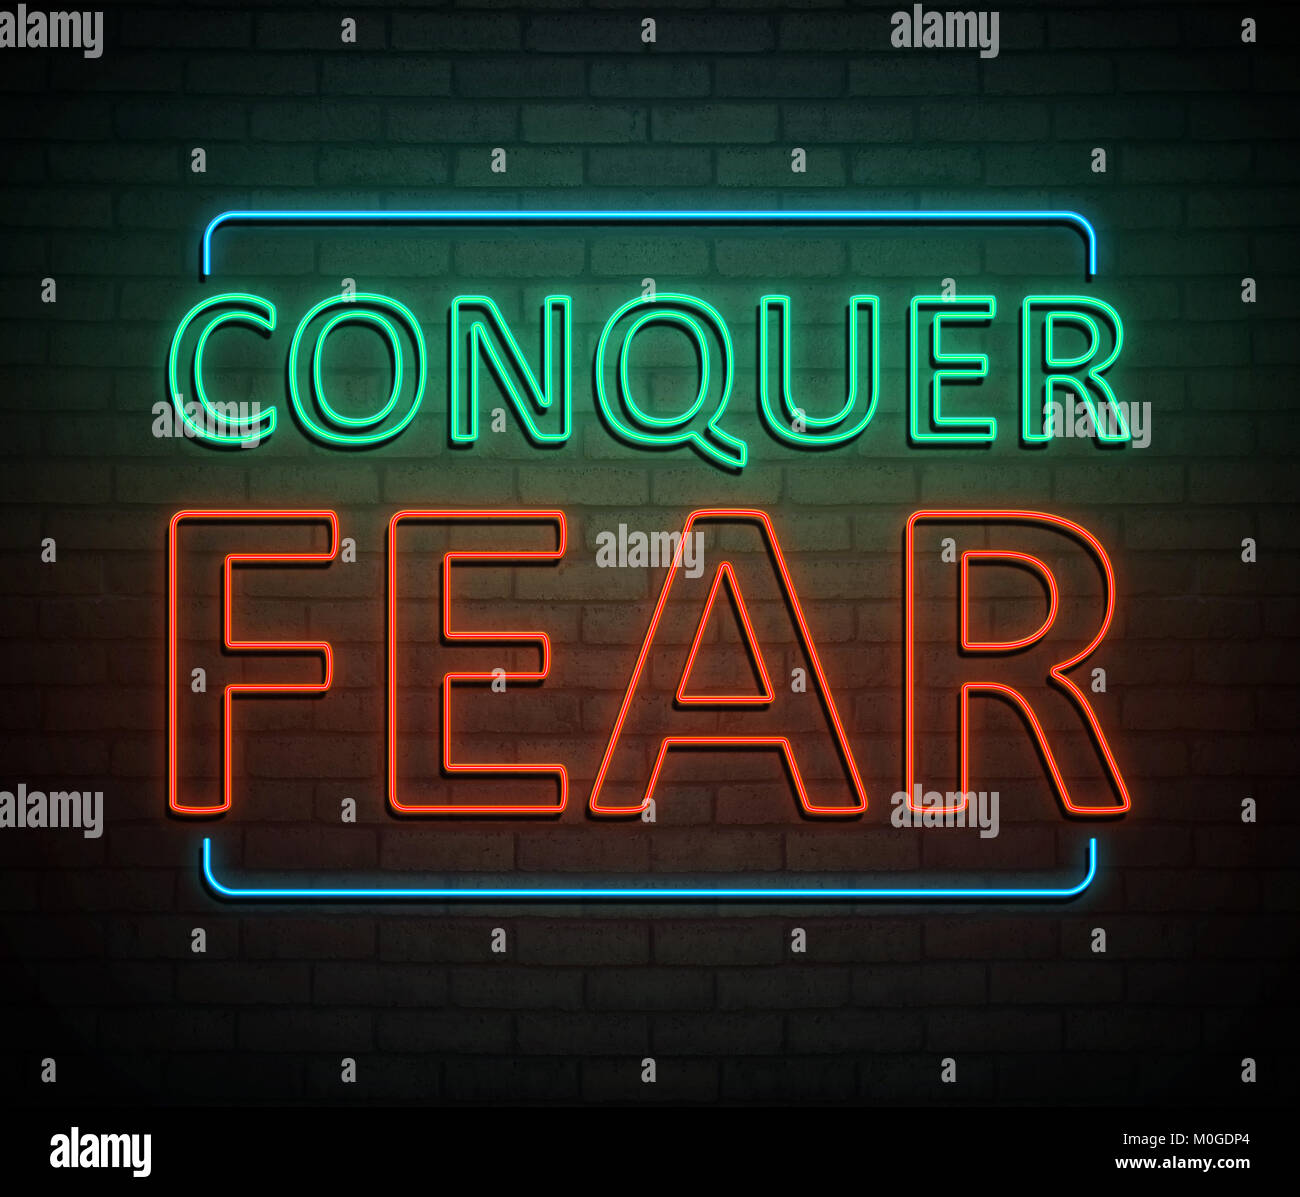 3d Illustration depicting an illuminated neon sign with a conquer fear concept. Stock Photo